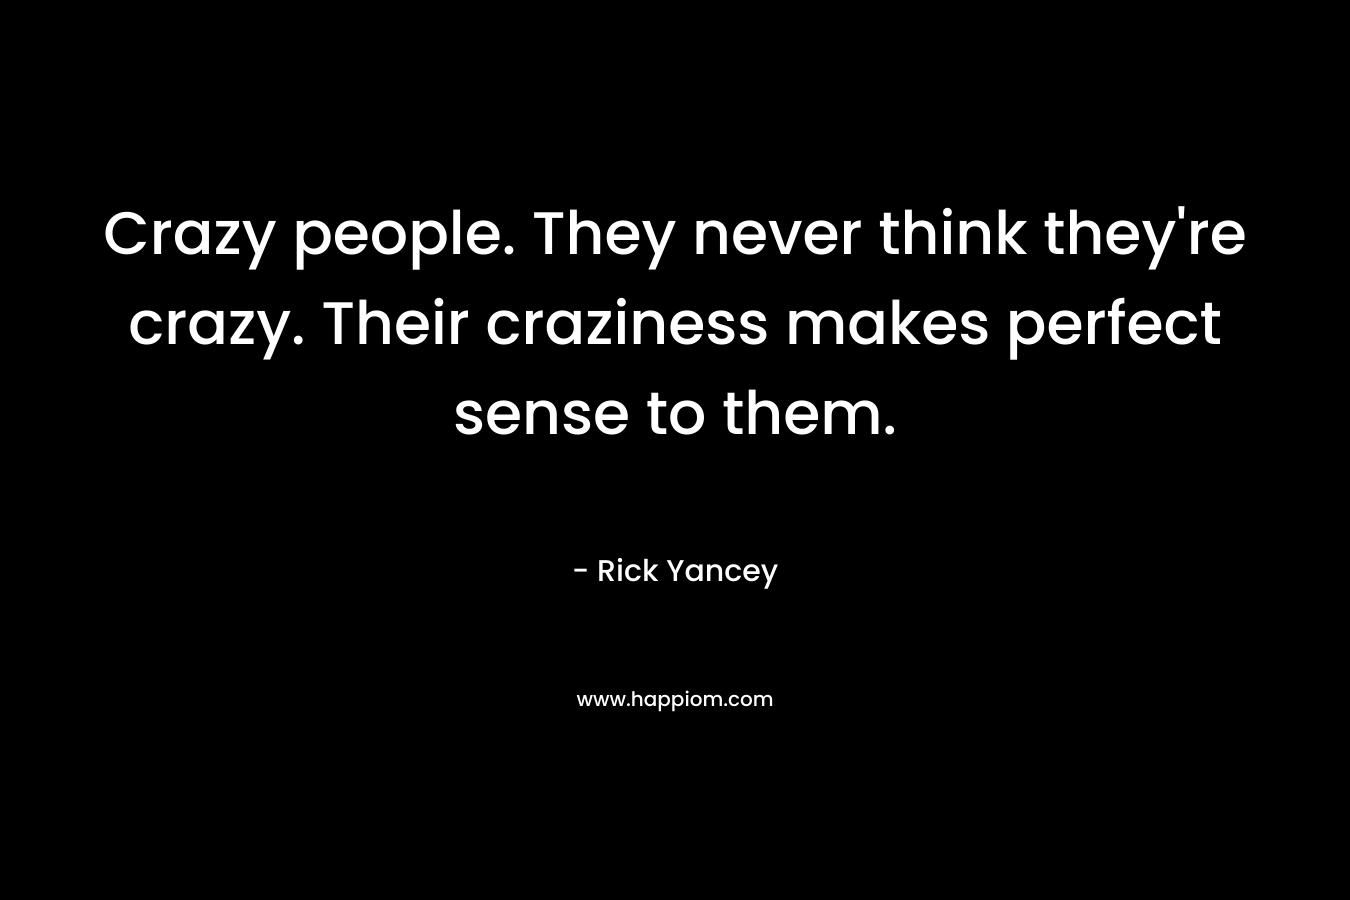 Crazy people. They never think they're crazy. Their craziness makes perfect sense to them.